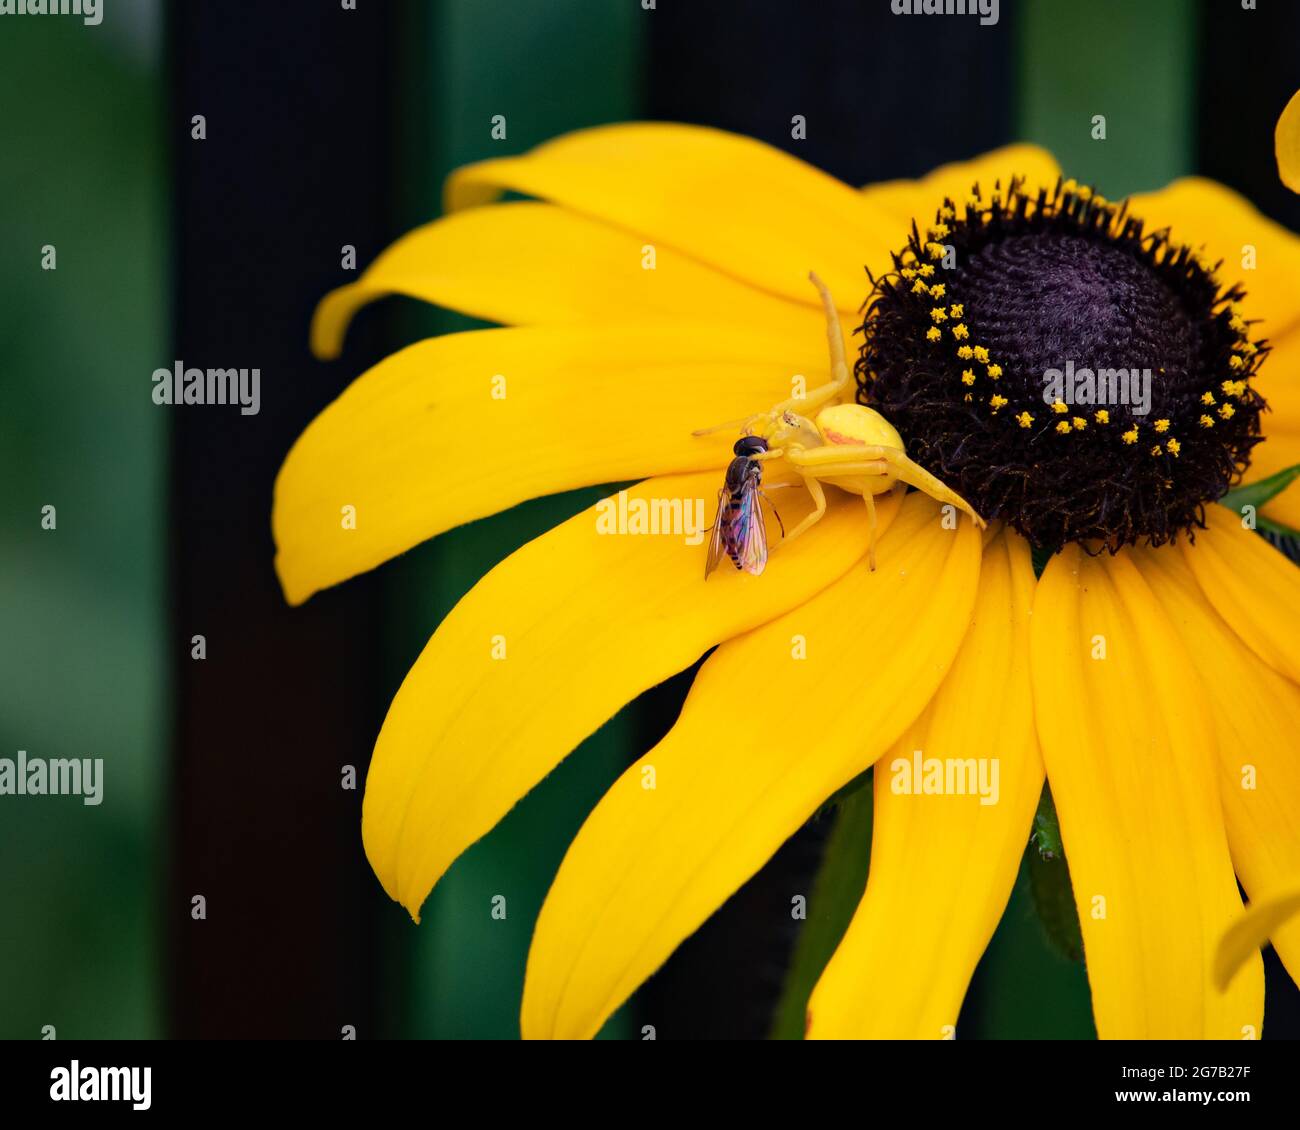 A yellow flower spider, Misumena vatia, also known as a goldenrod crab spider, feeding on a small fly or bee on a yellow rudbeckia flower in a garden. Stock Photo